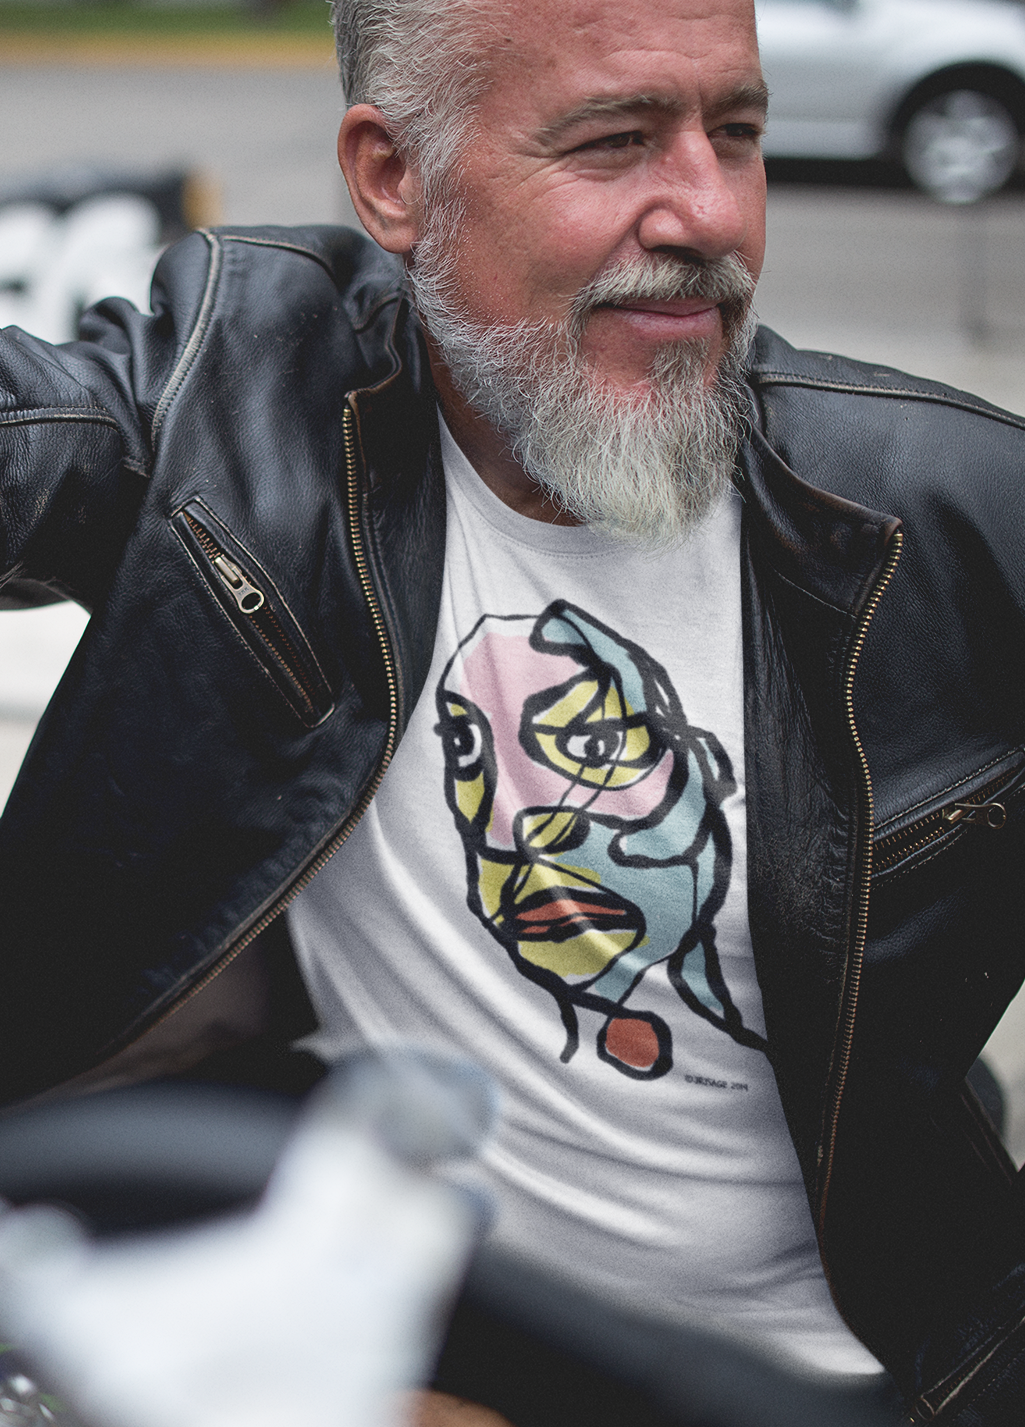 Abstract man portrait t-shirt - Man wearing an Edgy Eddie abstract man's face illustrated on a vegan white cotton t-shirt by Hector and Bone